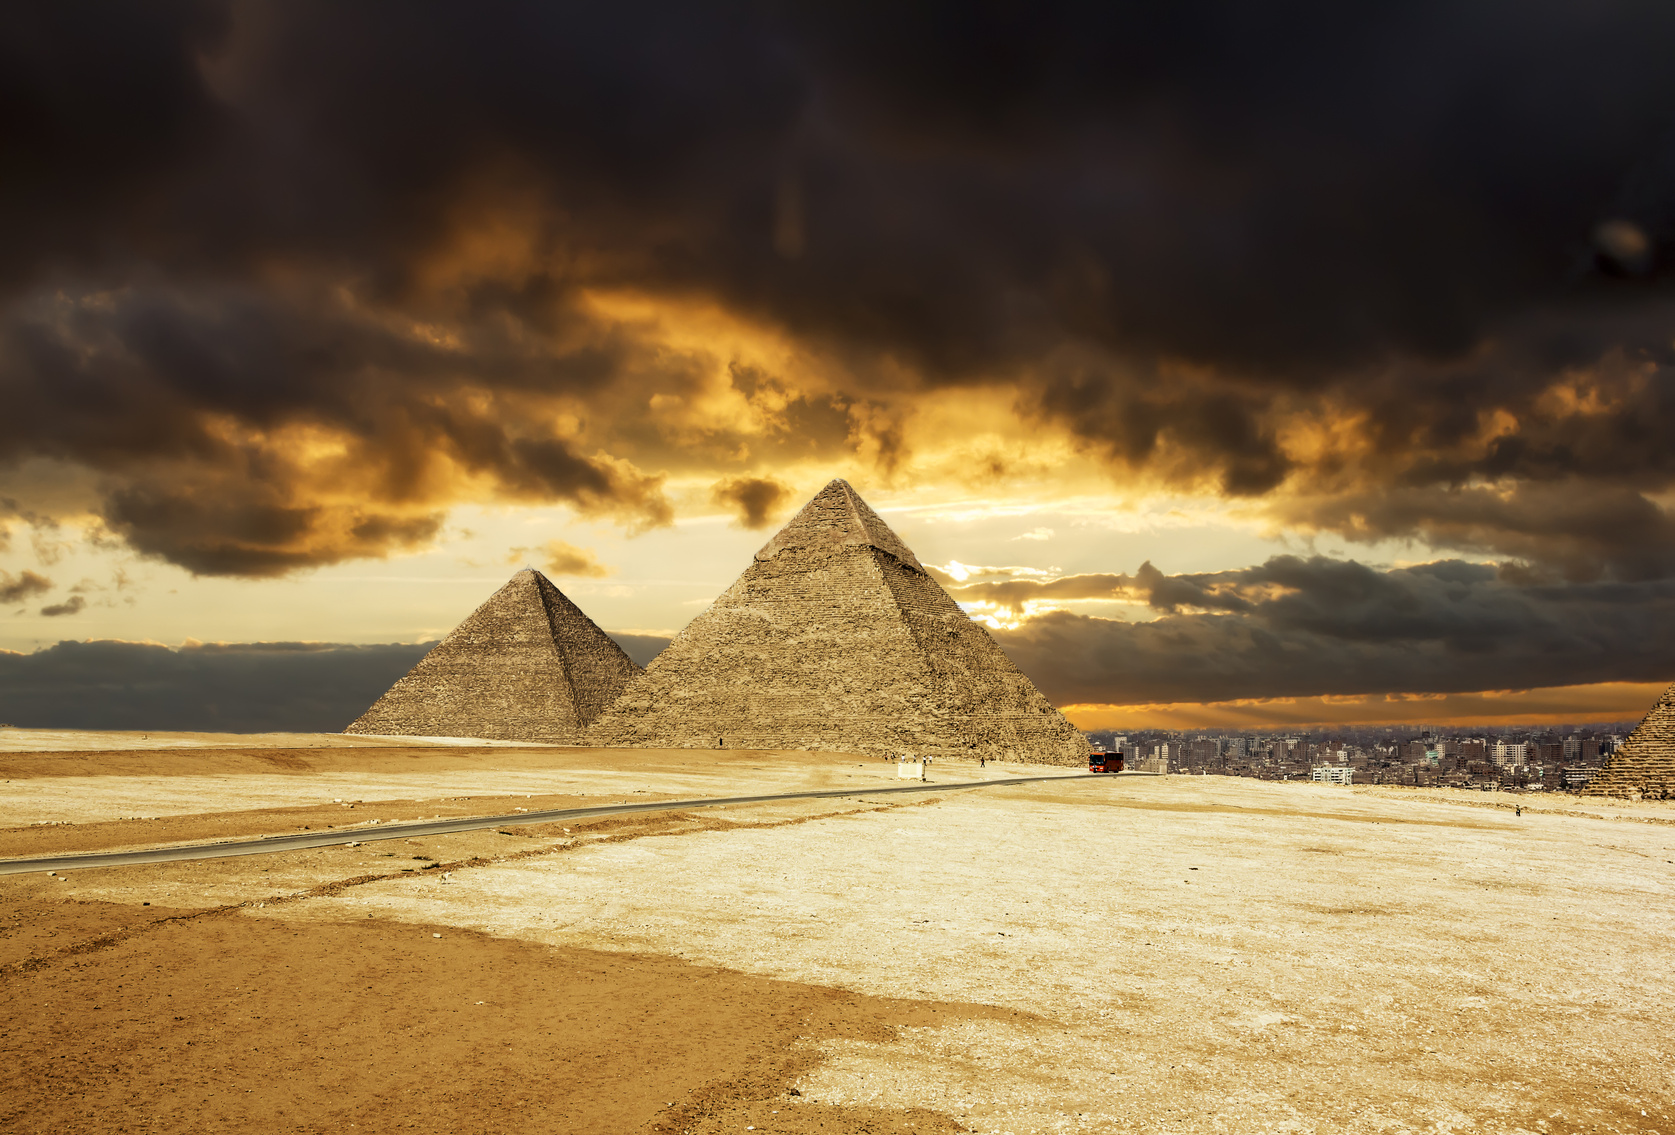 Pyramids at Giza on the background of the Sunset,Cairo, Egypt